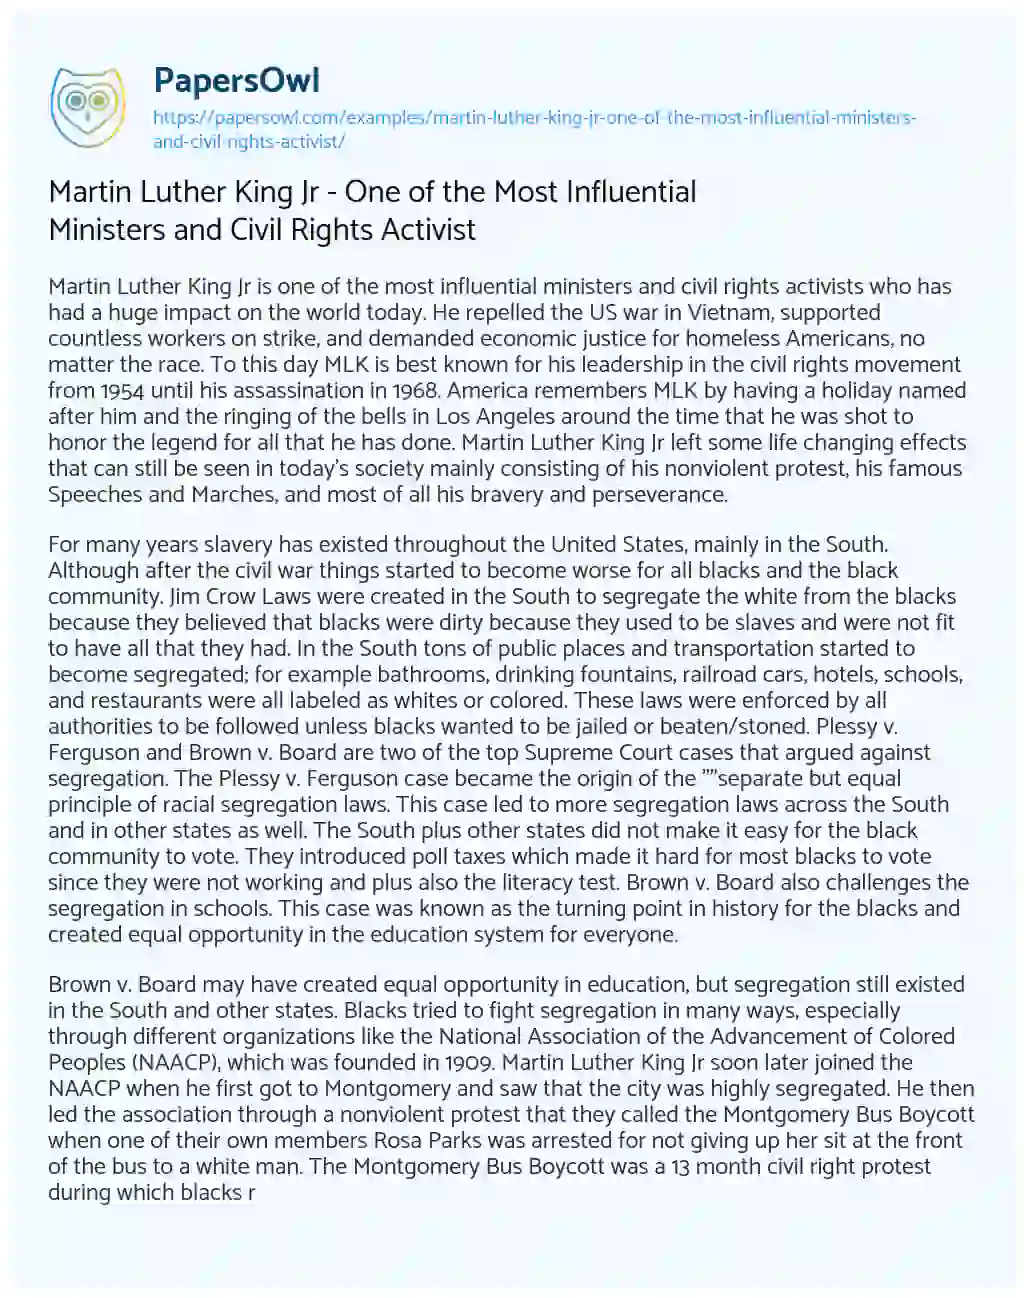 Essay on Martin Luther King Jr – One of the most Influential Ministers and Civil Rights Activist